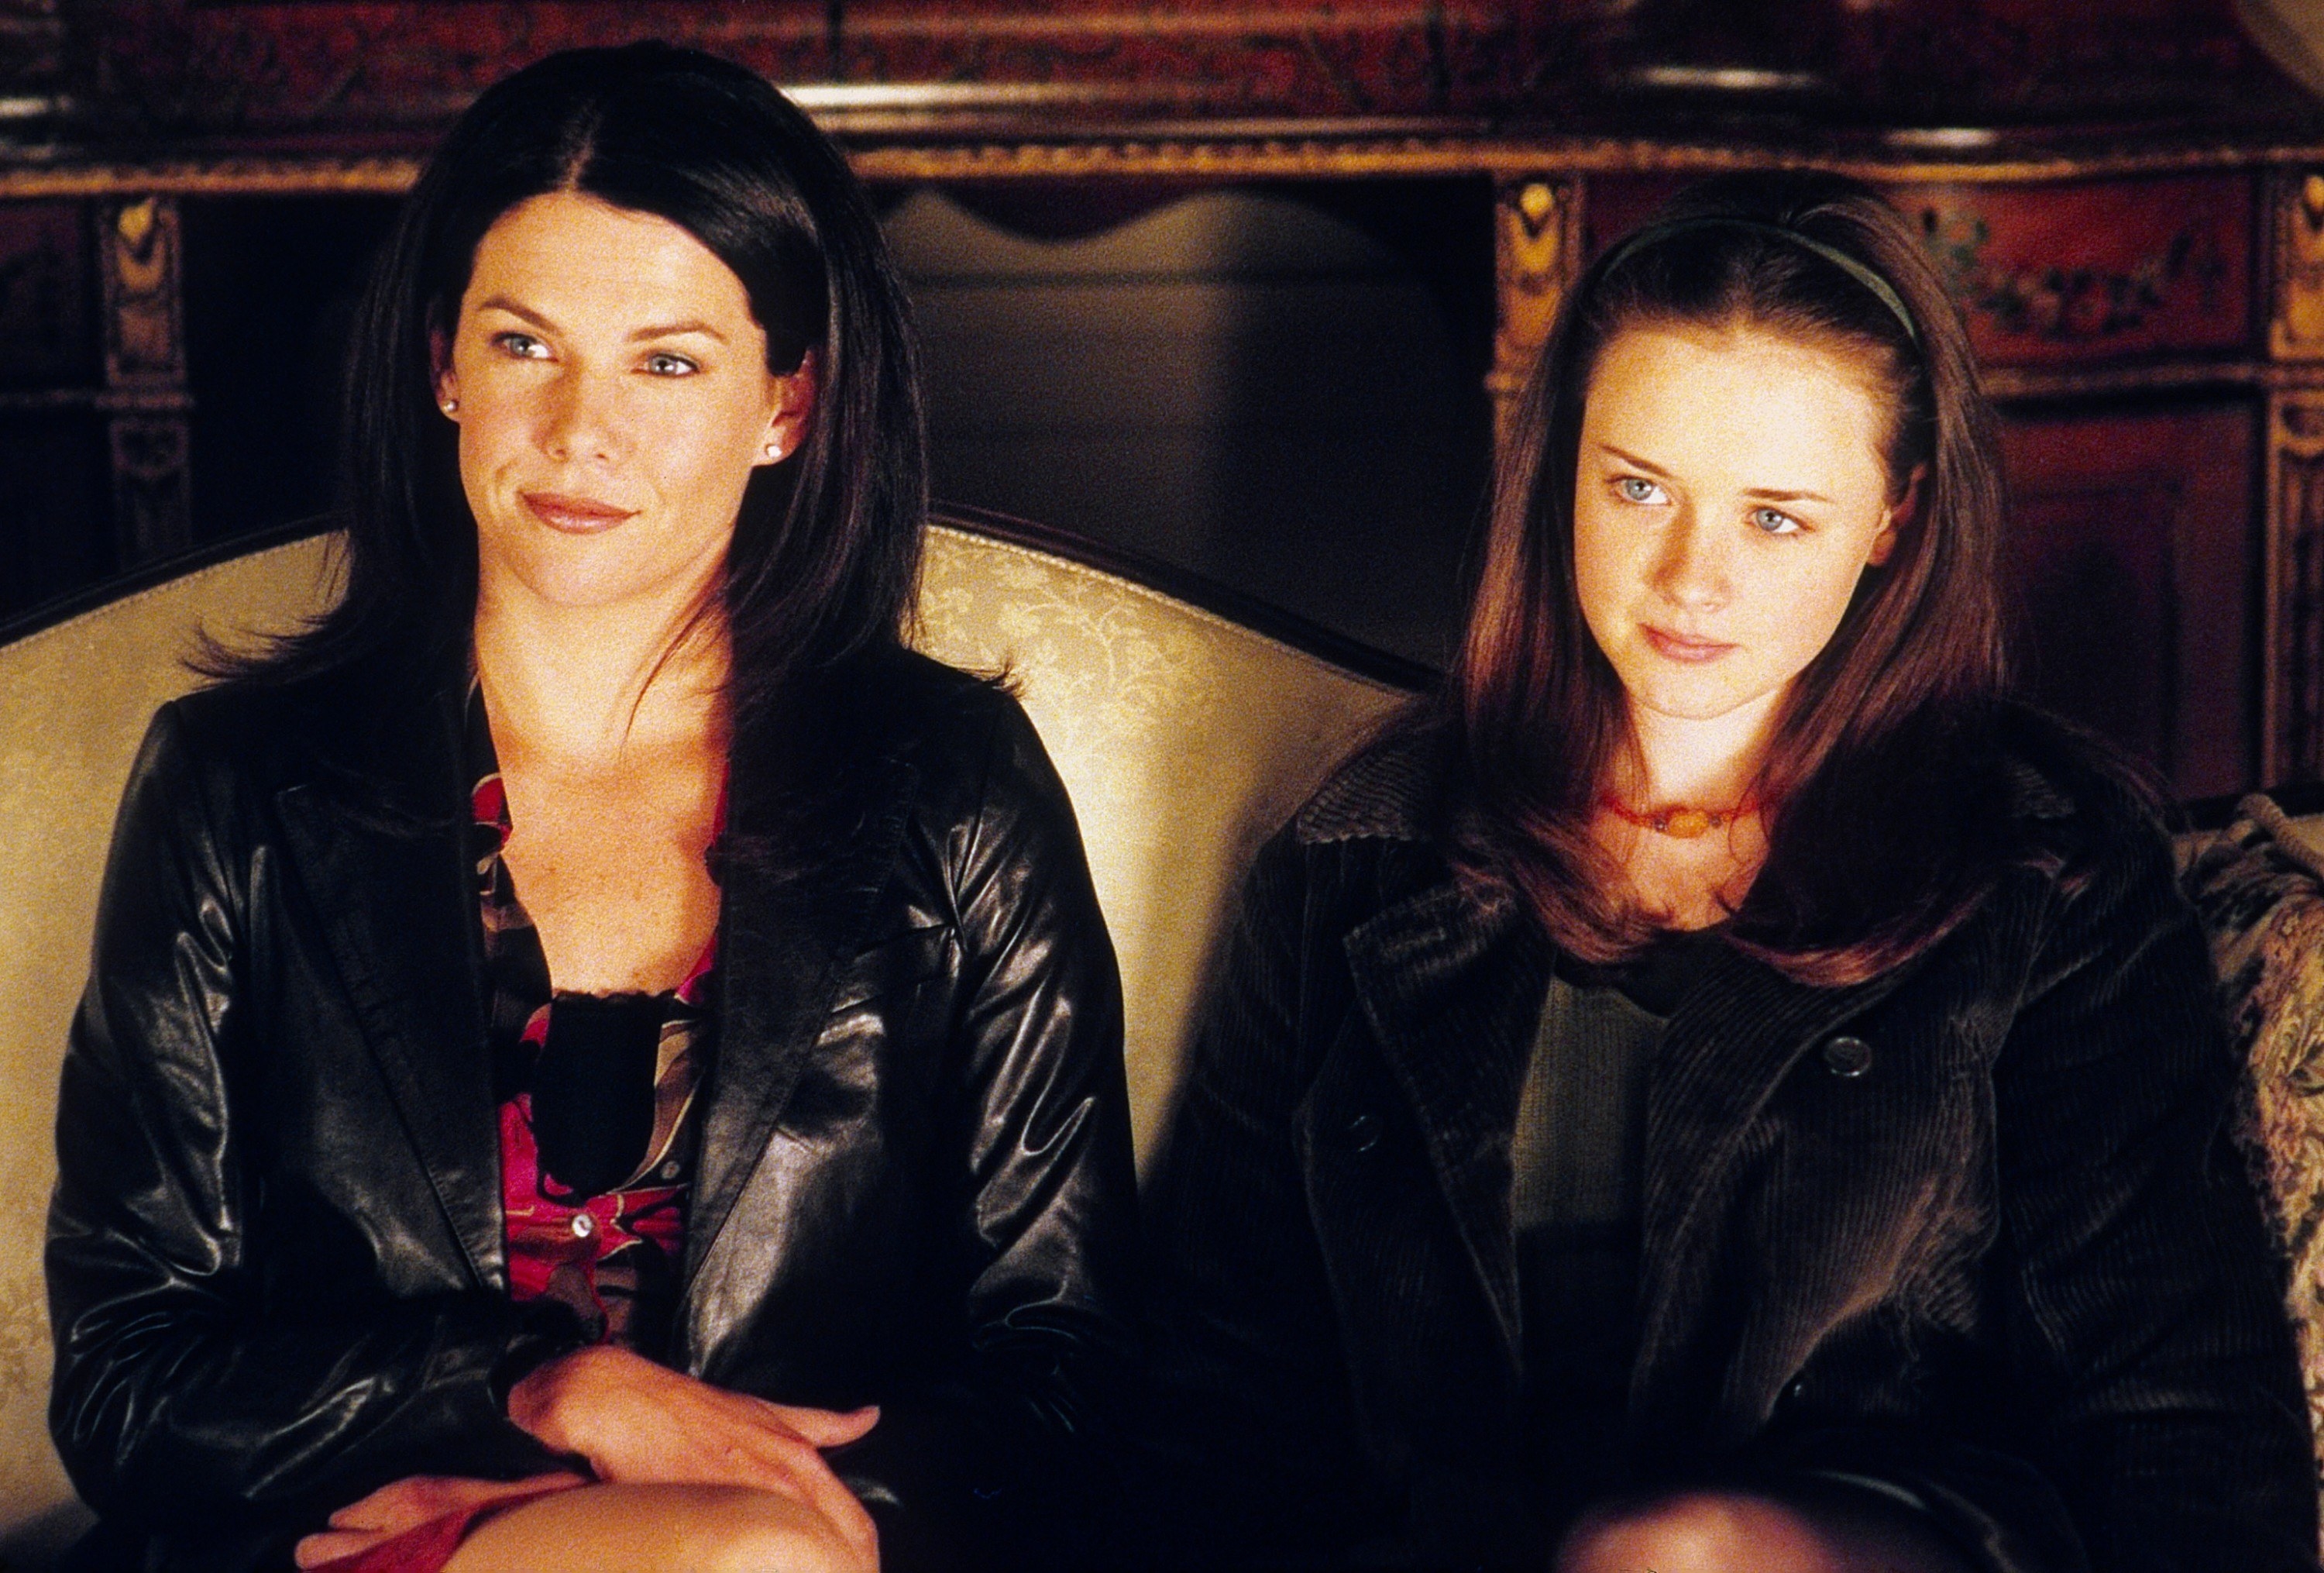 Lorelai and Rory sitting on a sofa in &quot;Gilmore Girls&quot;